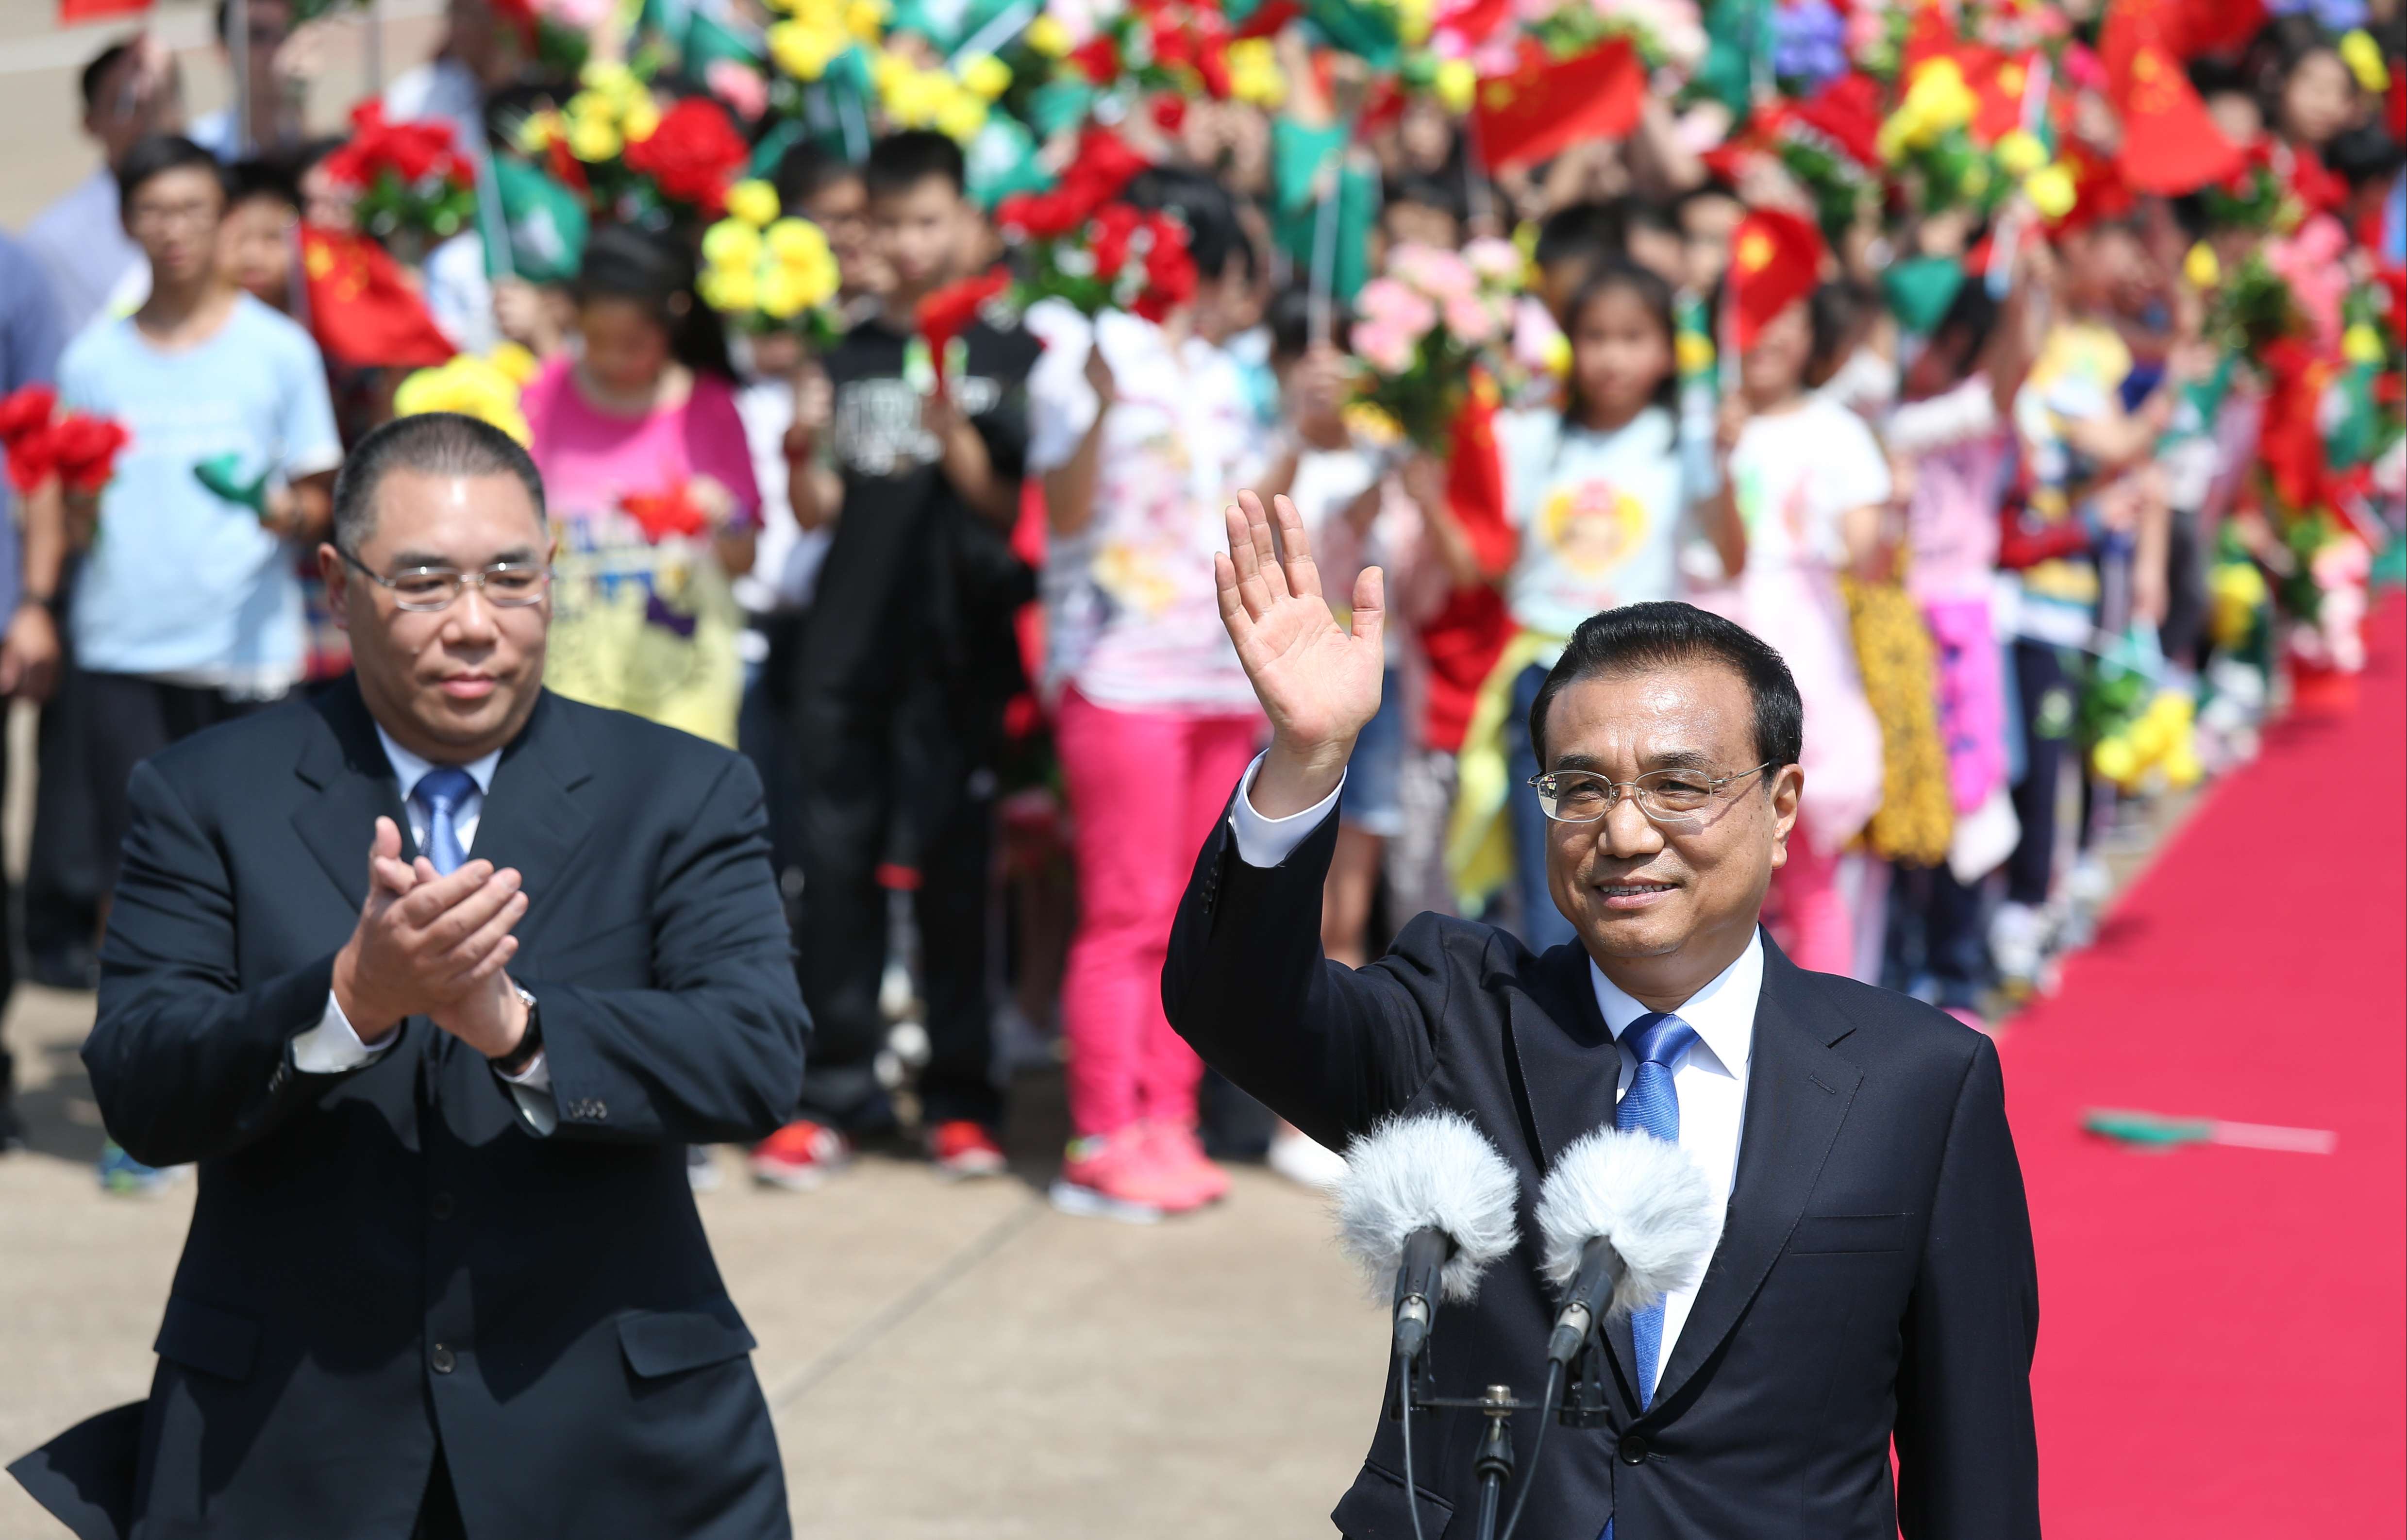 Premier Li Keqiang greets the colourful crowds gathered to welcome him at Macau International Airport on October 10, as Macau Chief Executive Fernando Chui applauds. Photo: Dickson Lee